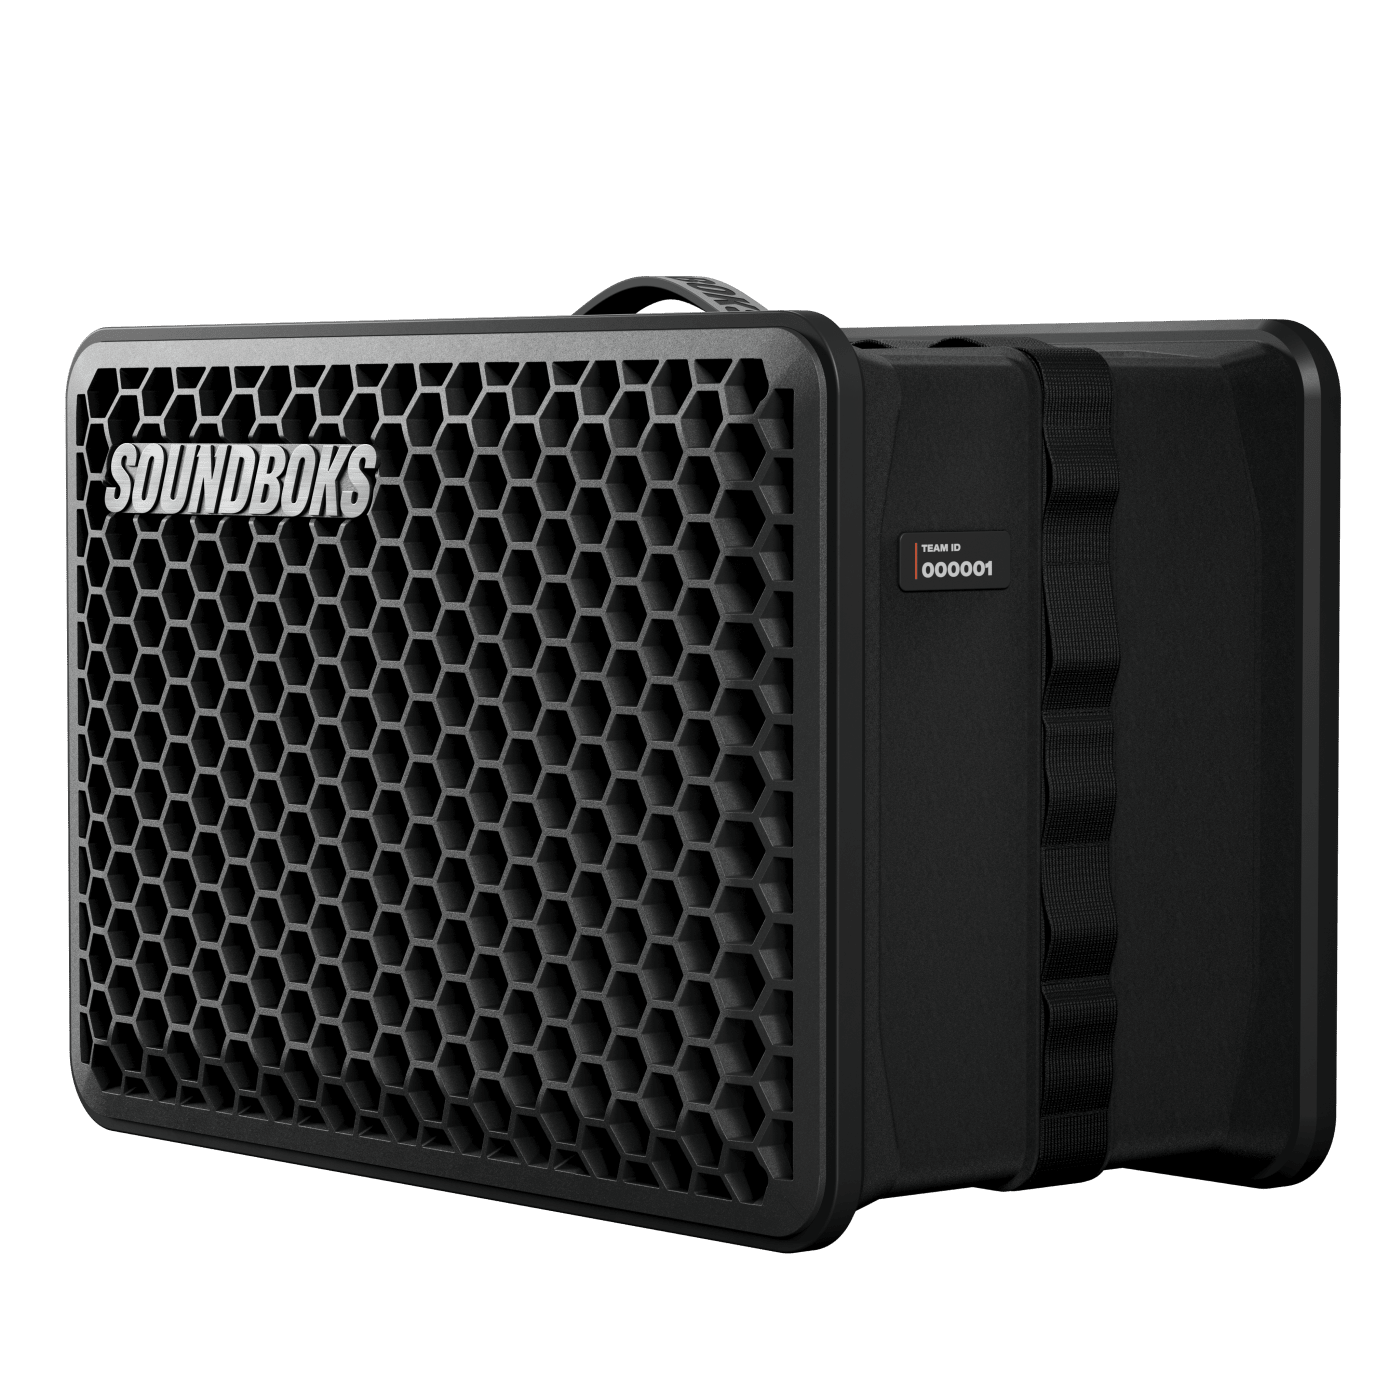 Rent JBL Partybox 310 Party Bluetooth Speaker from €24.90 per month